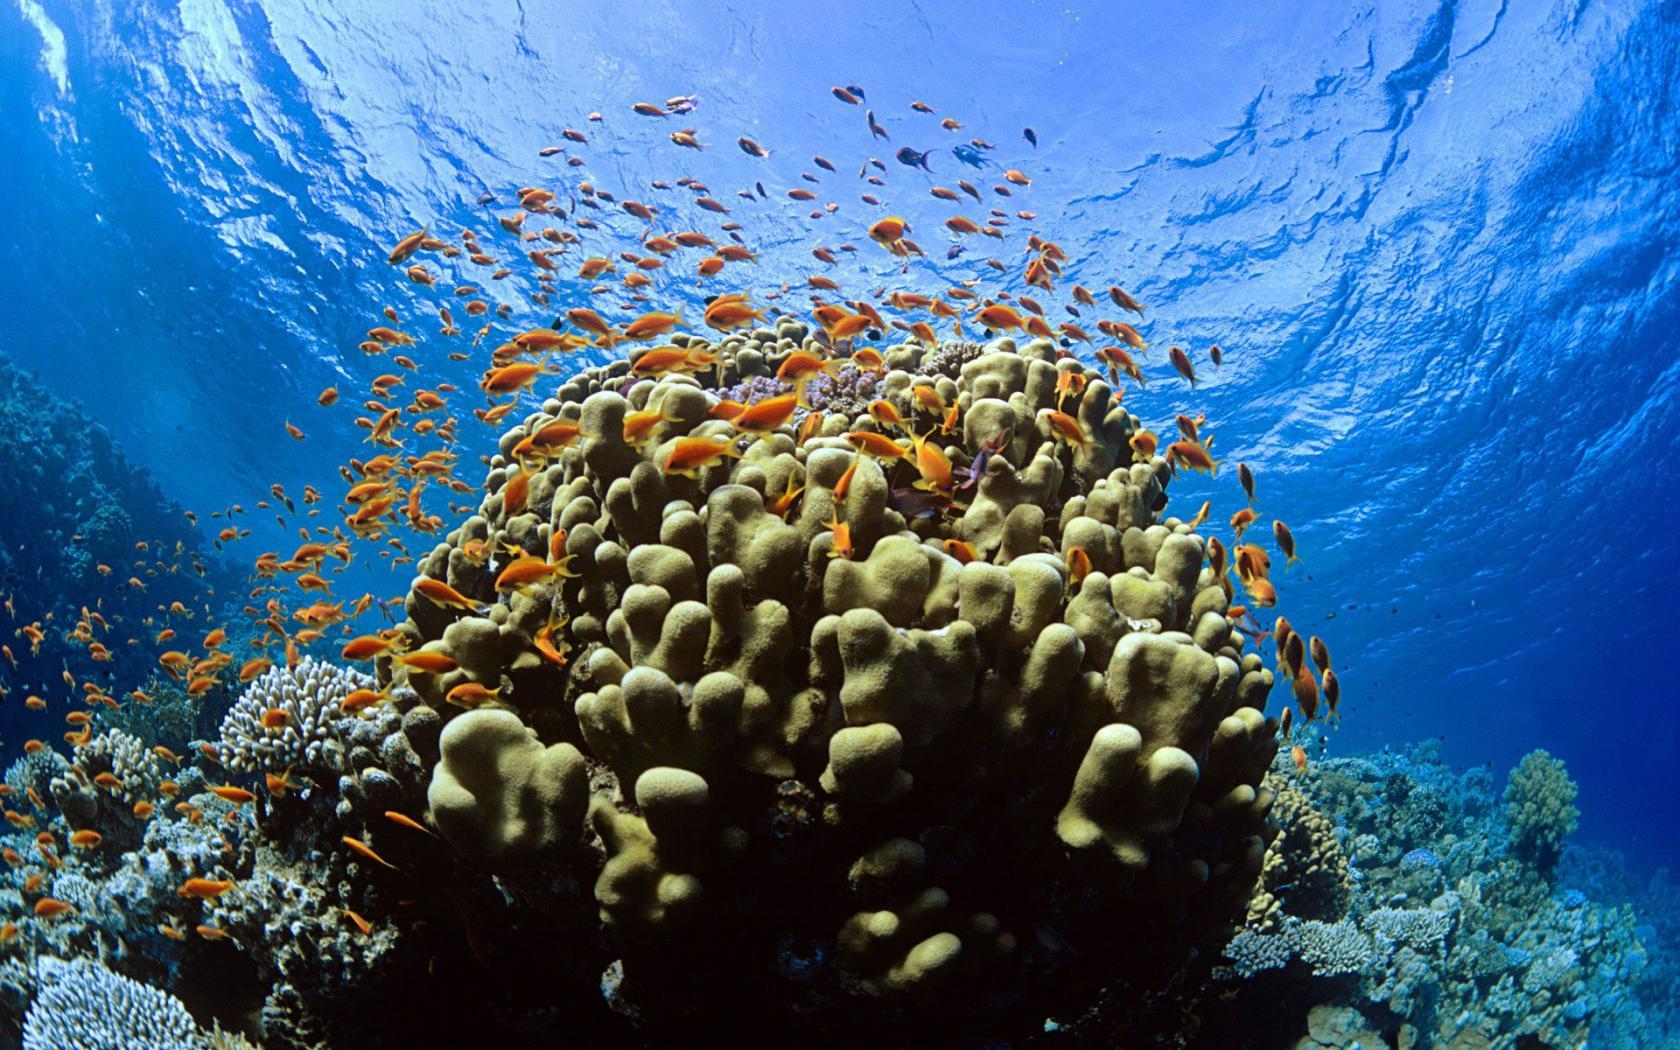 Coral Reef Wallpaper For Windows #cIG. Earth. Coral